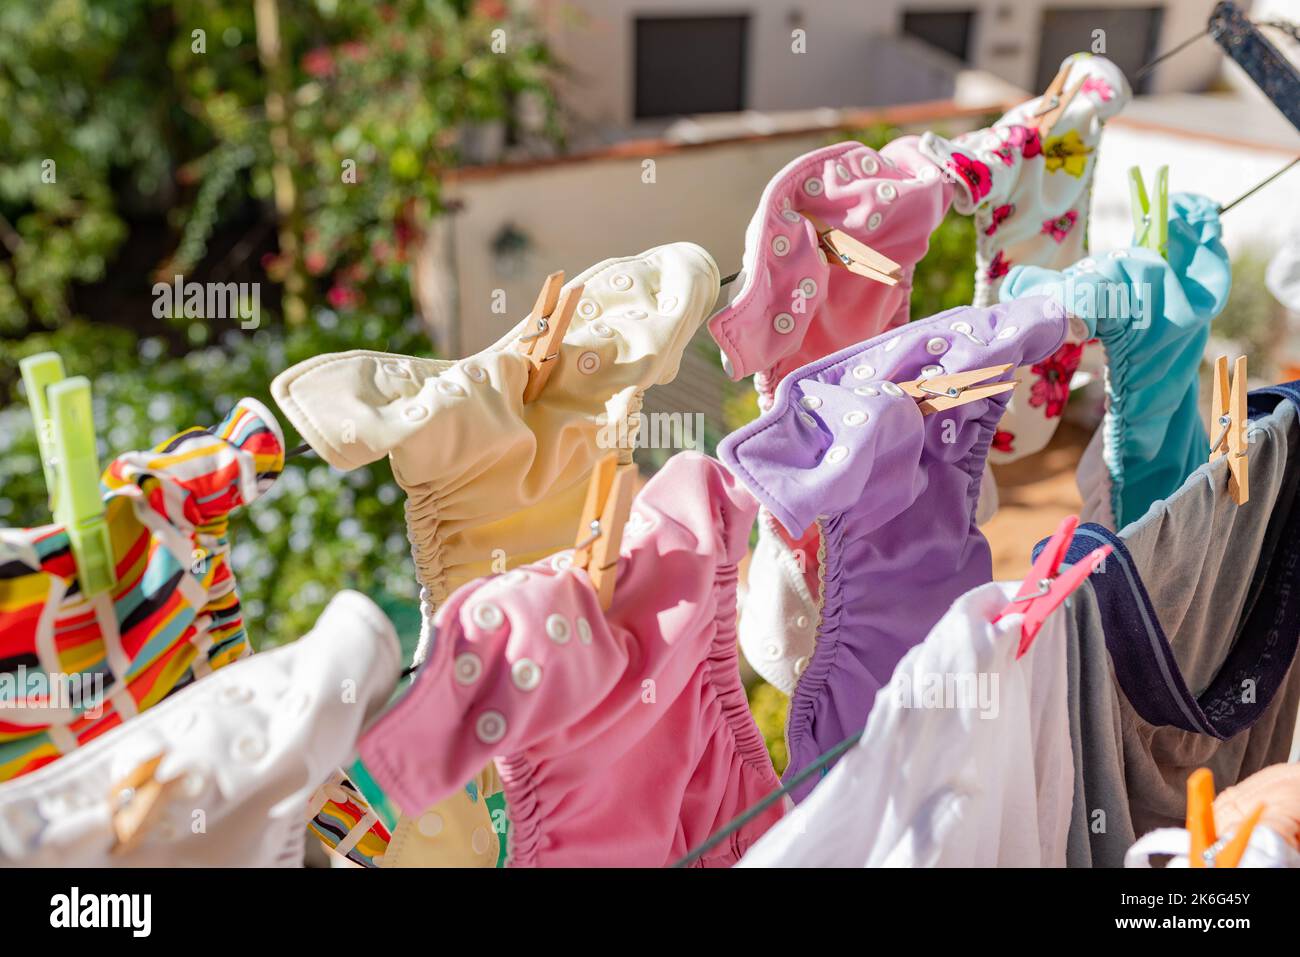 Cloth diapers hanging while drying under the sun on clothesline. Laundry of colorful reusable nappies for babies. Stock Photo